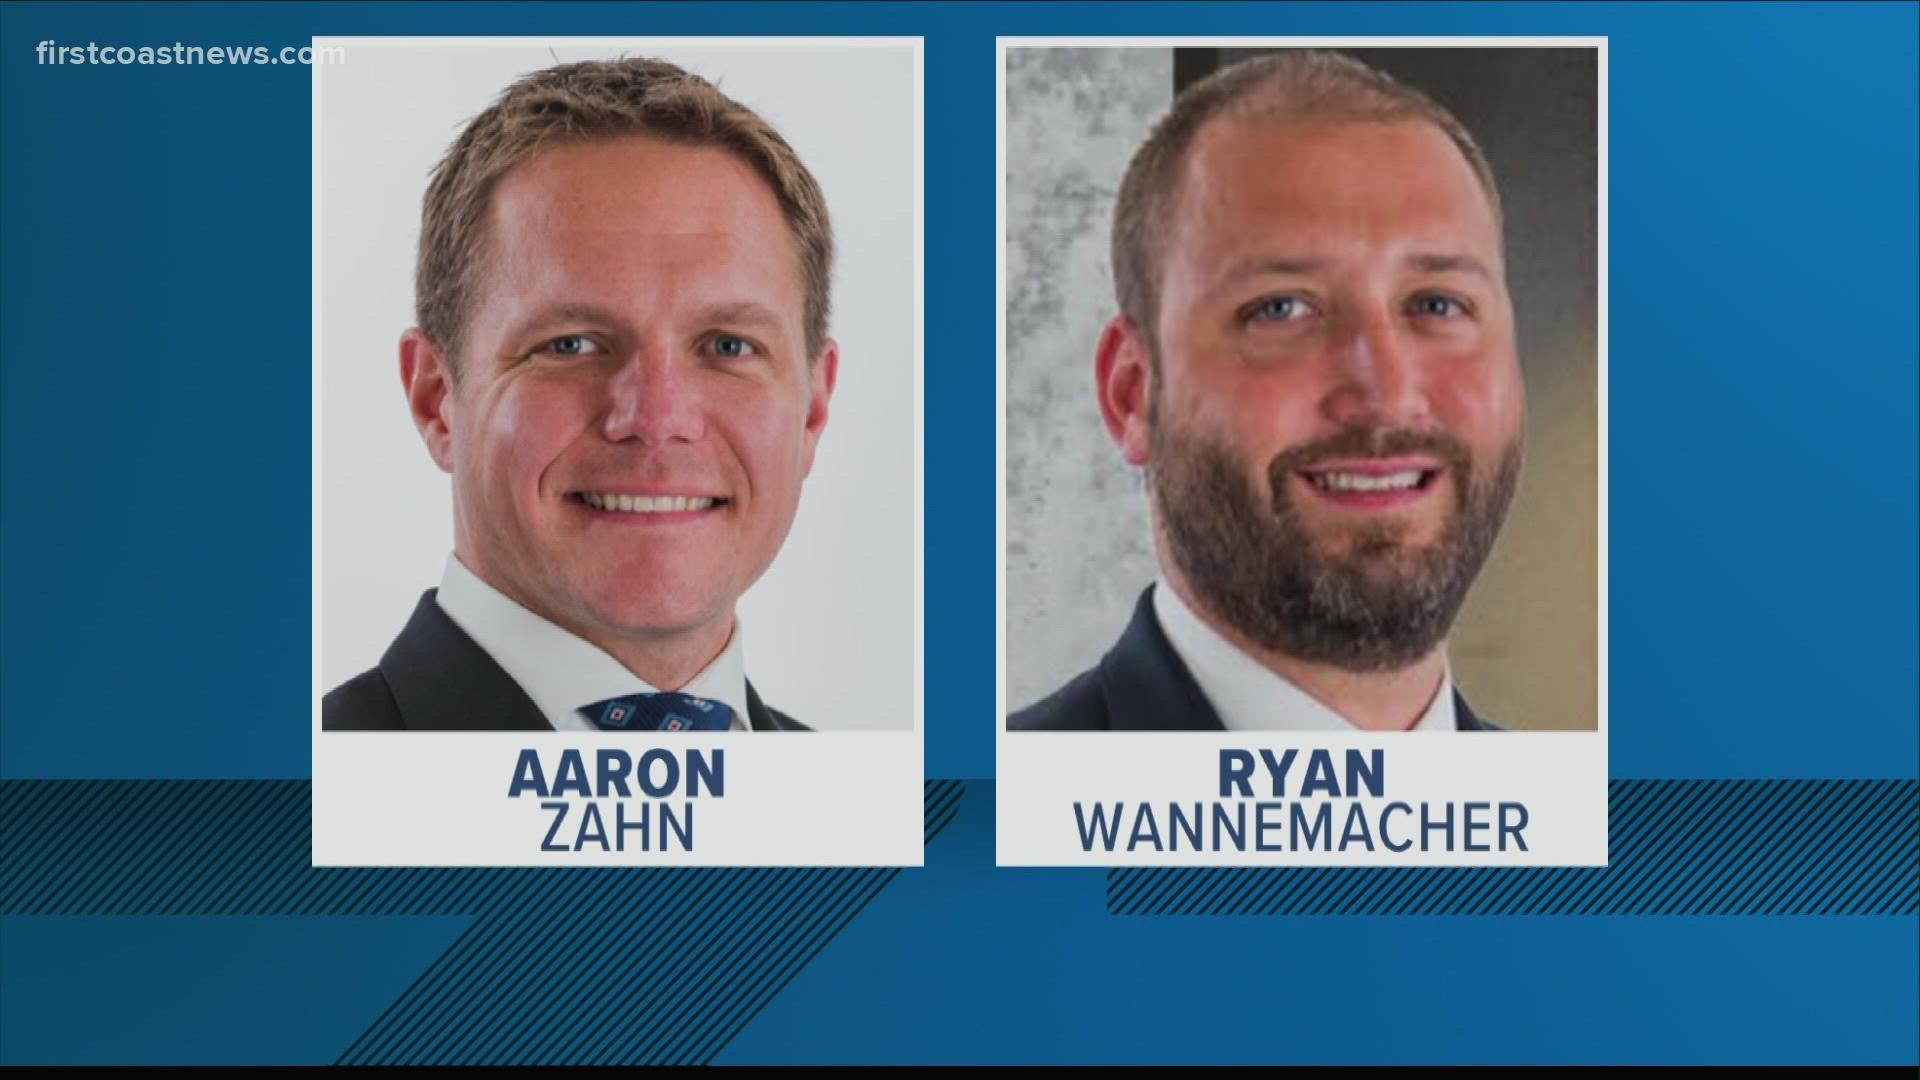 A federal grand jury has indicted JEA’s former CEO Aaron Zhan and former CFO Ryan Wannemacher for their roles in the failed sale of the city utility in 2019.